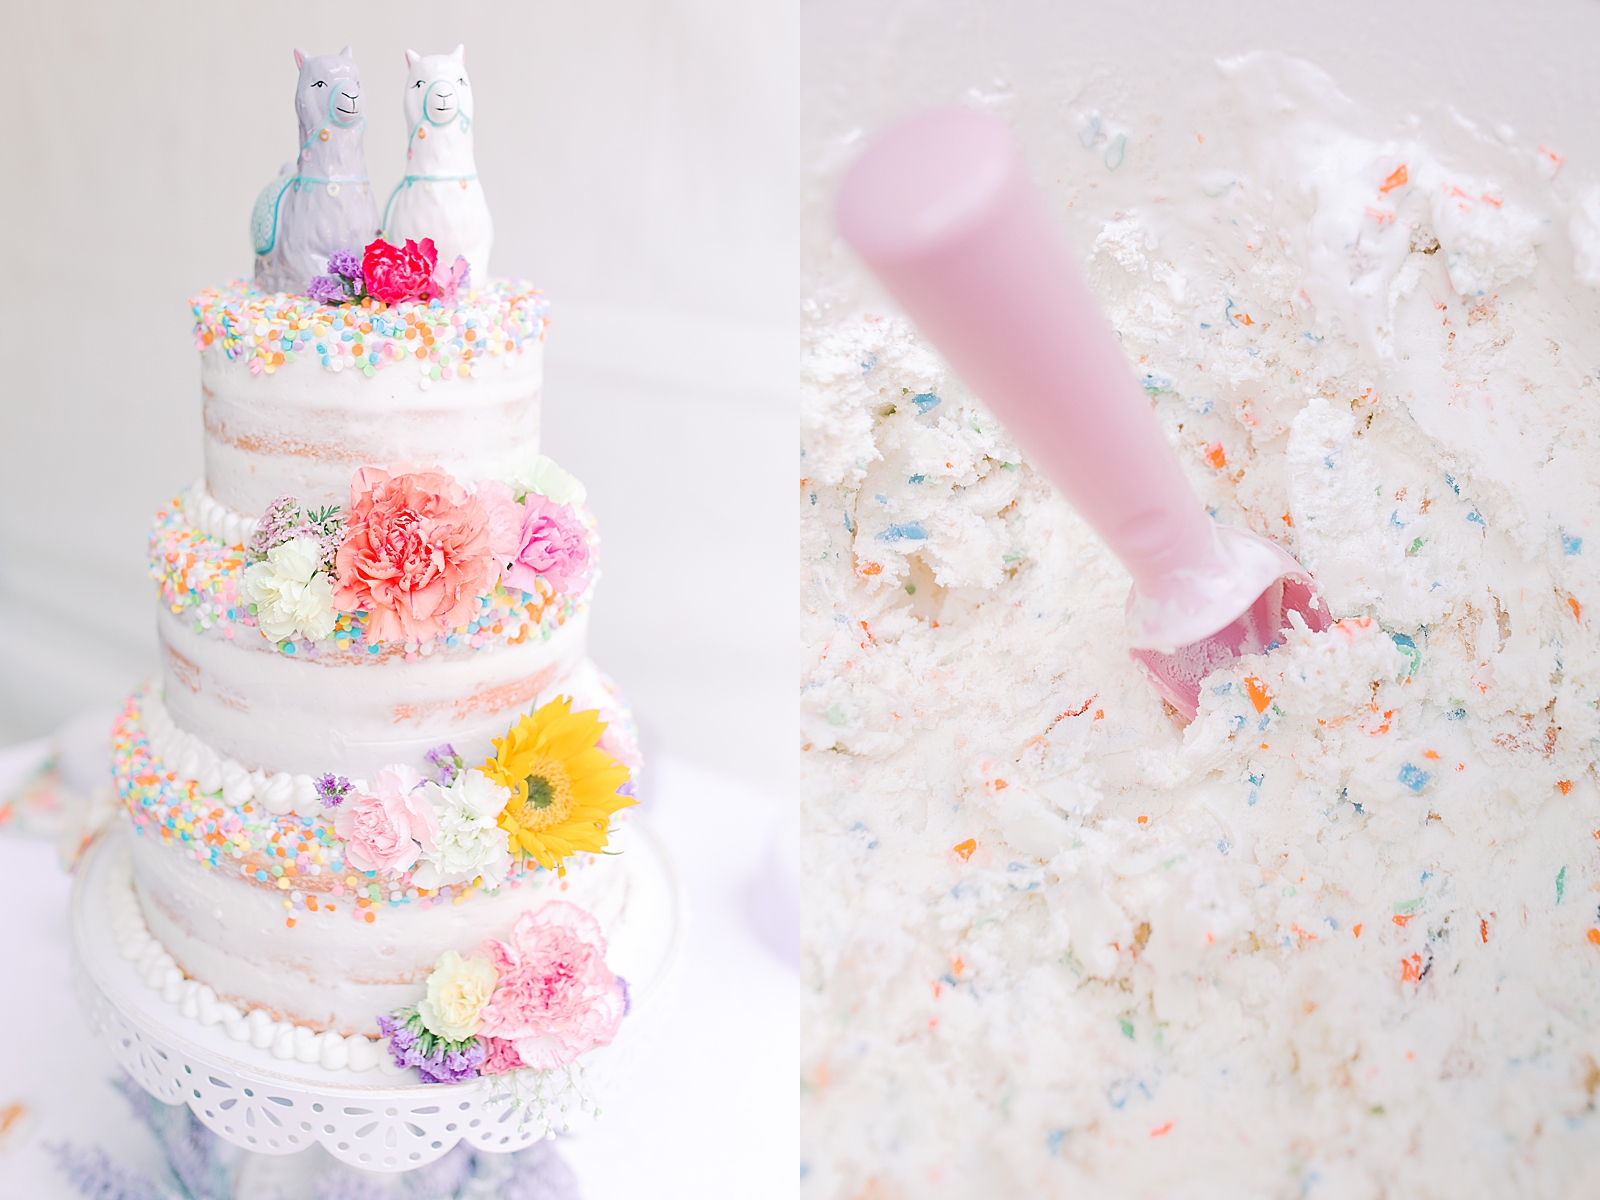 Black Fox Farms Garden Wedding Reception Colorful cake with Sprinkles and Llamas on top and Sprinkle Ice Cream Photos